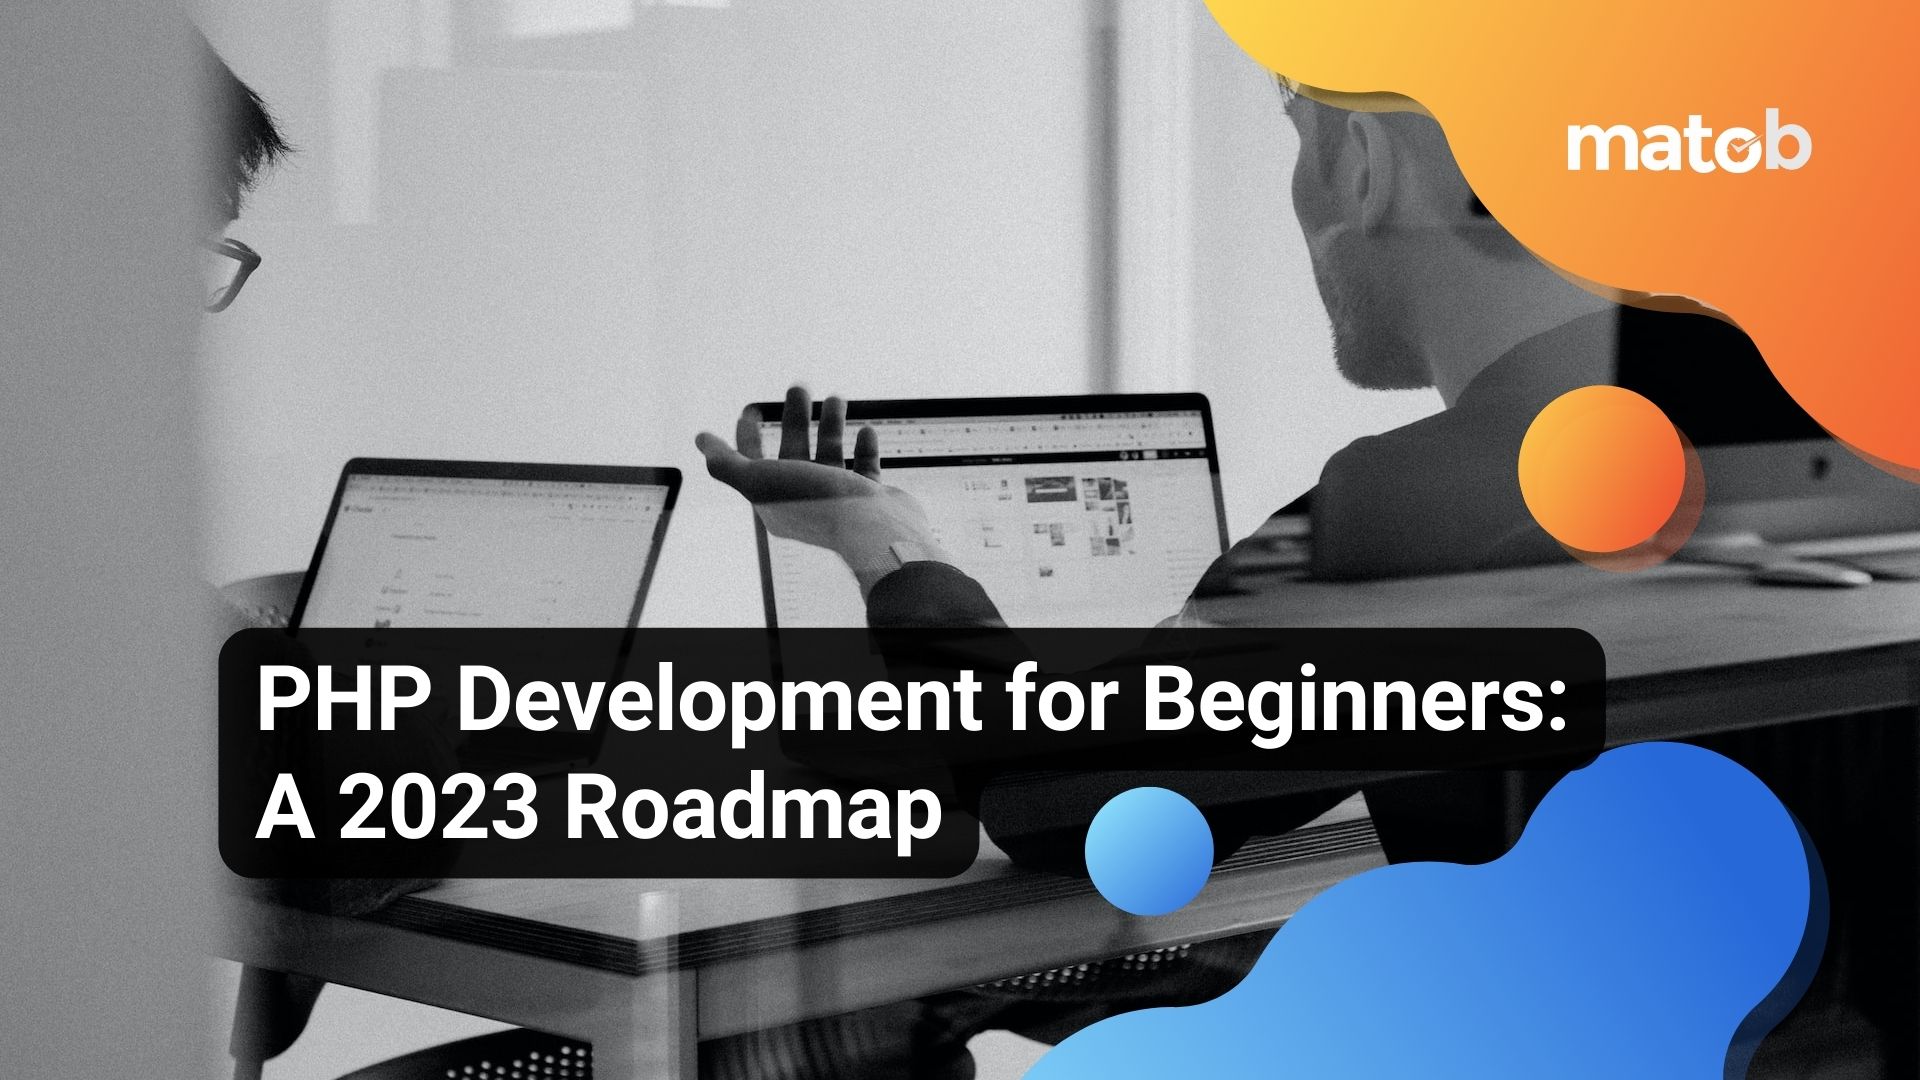 PHP Development for Beginners: A 2023 Roadmap